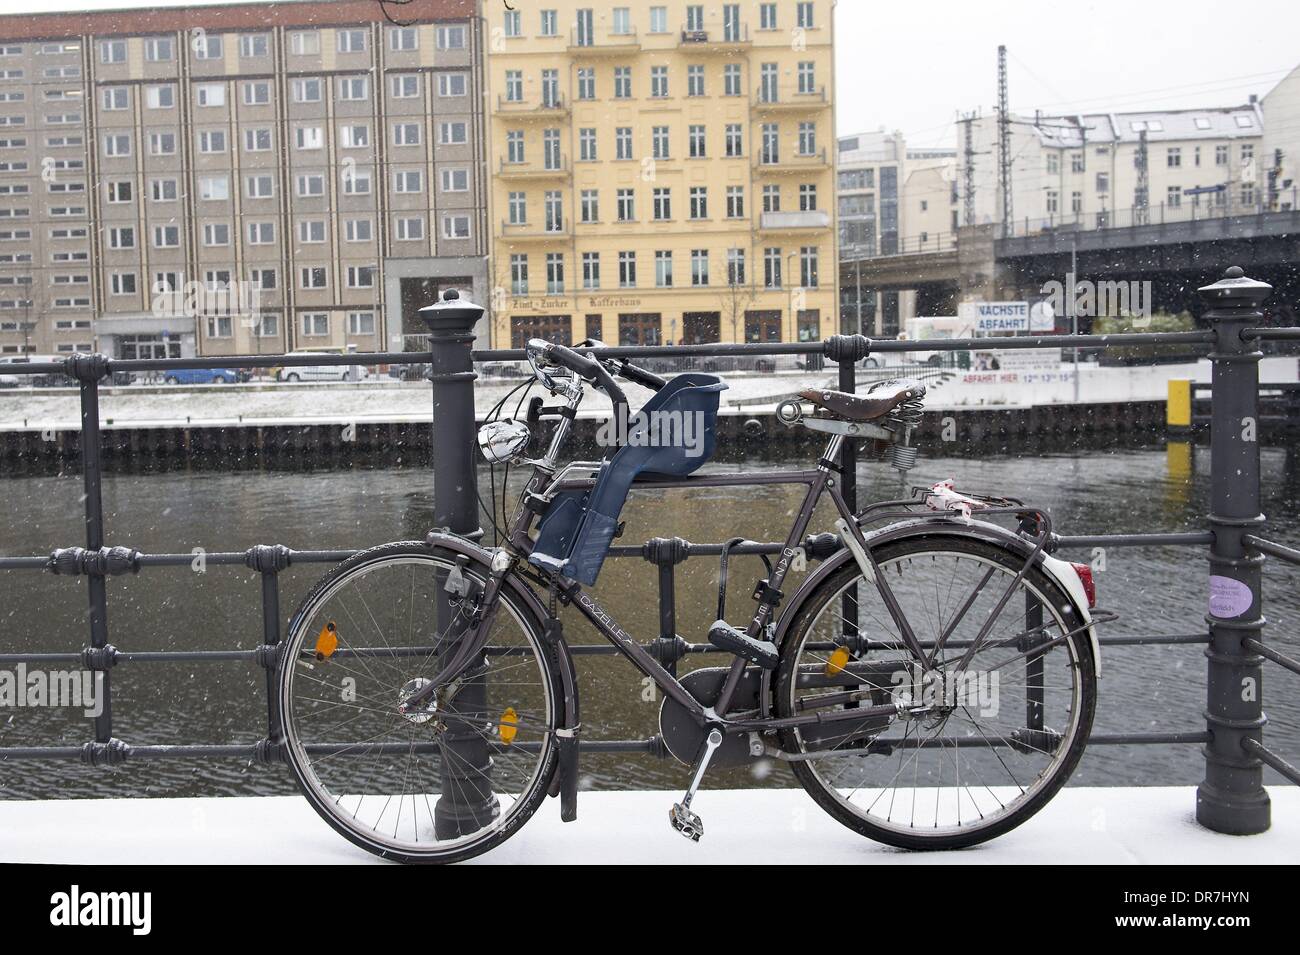 Berlin, Germany. 21st Jan, 2014. Berlin receives one of the 1st snow fall of this winter with negative temperatures, on Jan. 21, 2014 © Goncalo Silva/NurPhoto/ZUMAPRESS.com/Alamy Live News Stock Photo